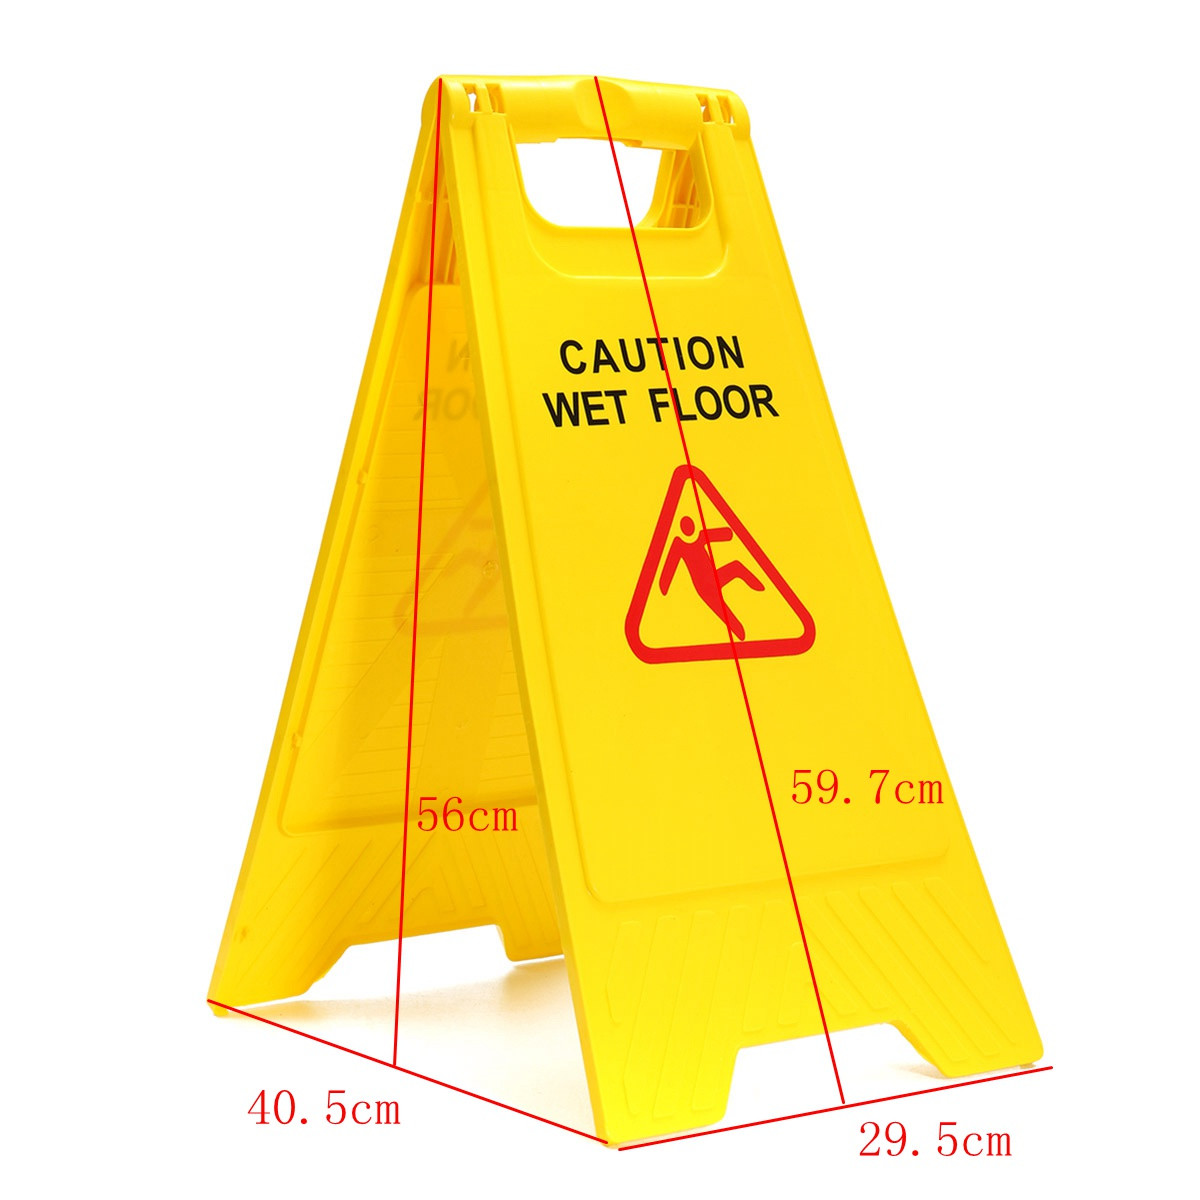 Plastic-Caution-Wet-Floor-Folding-Safety-Sign-Cleaning-Slippery-Warning-1637263